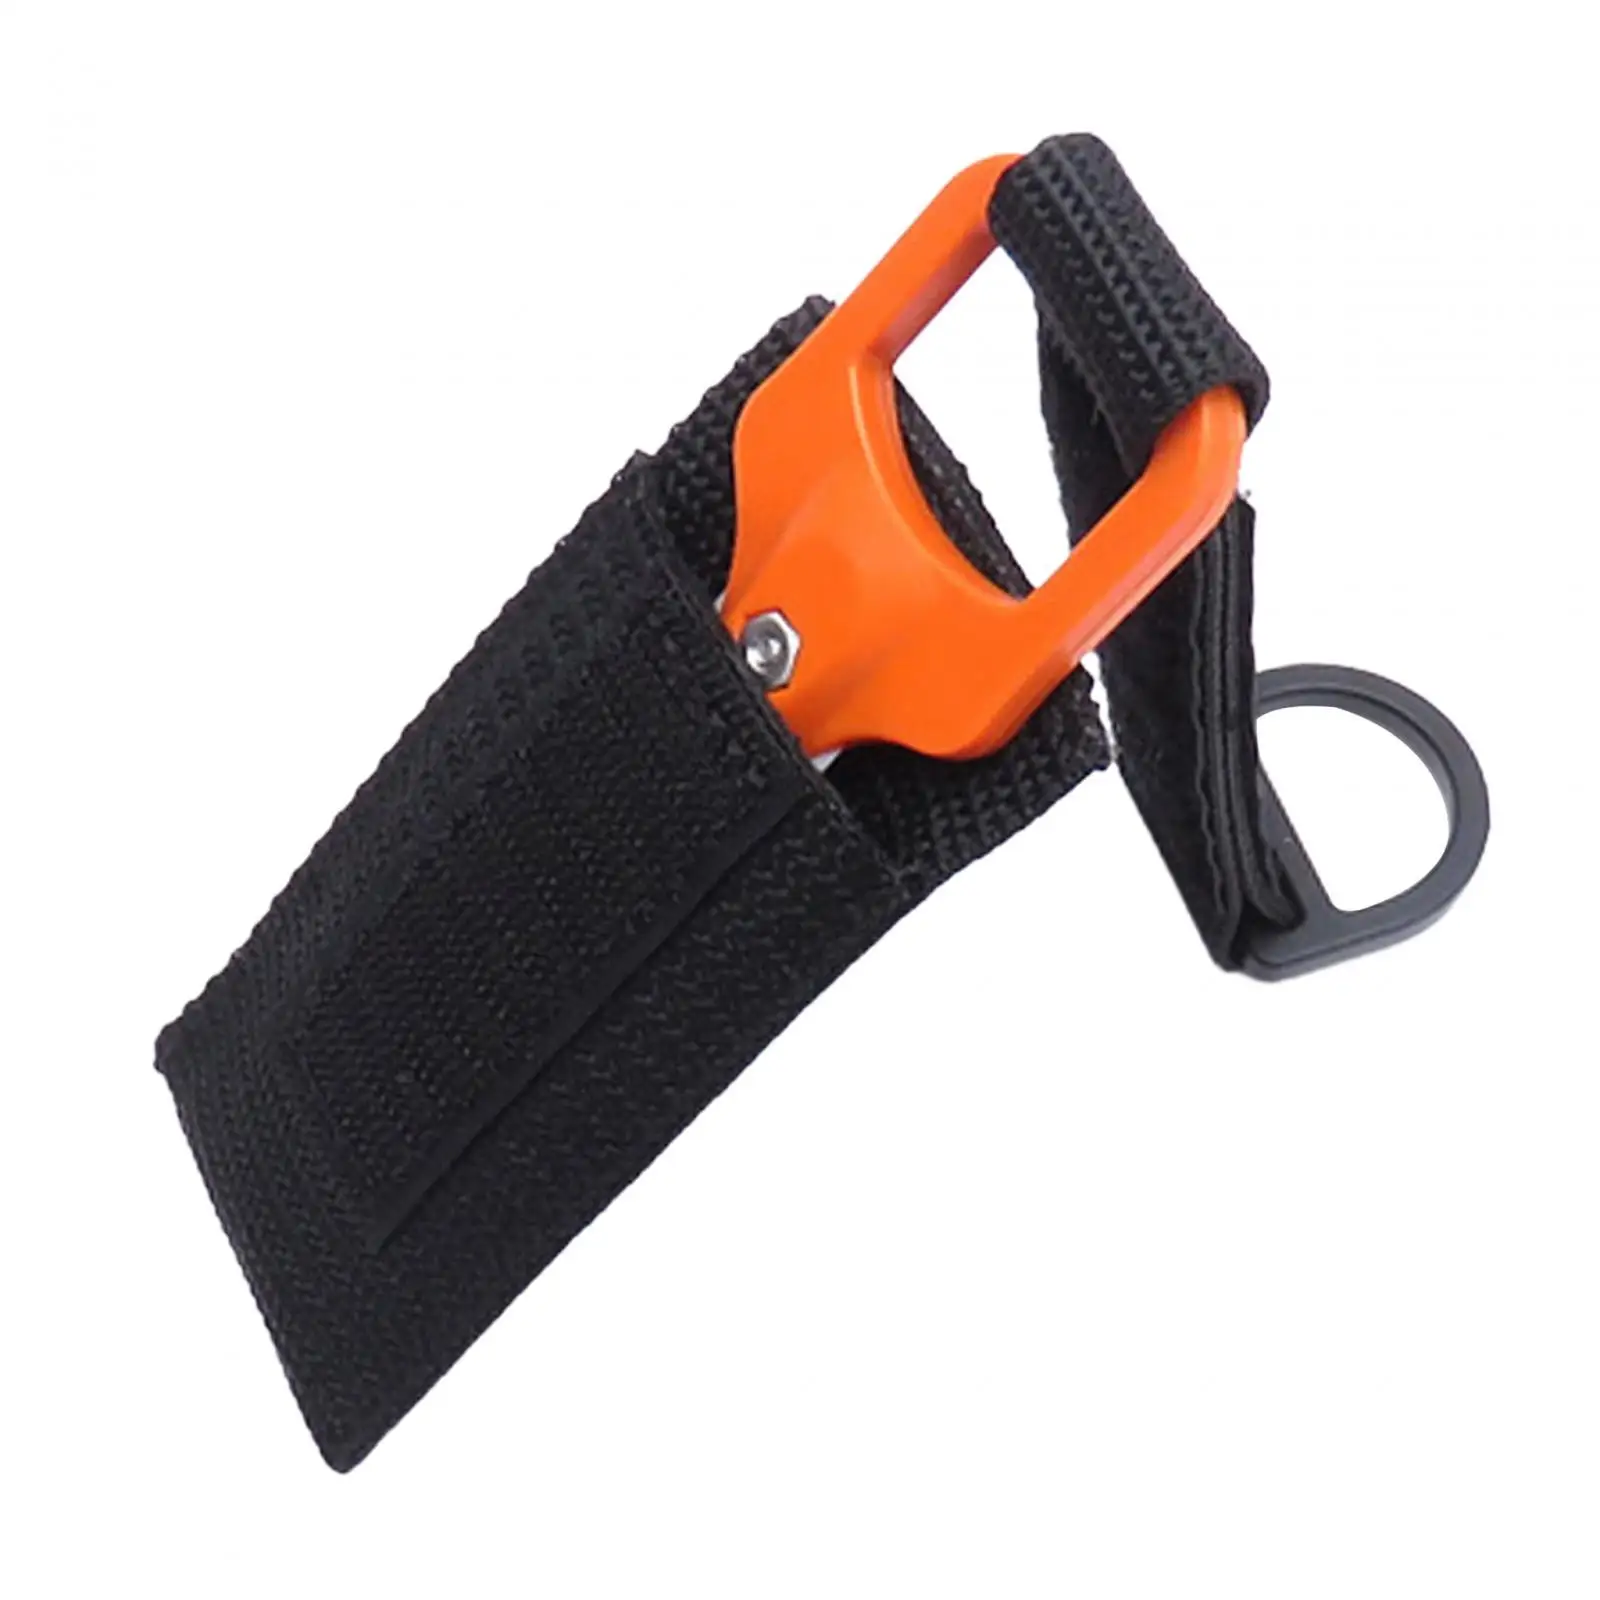 Diving Line Cutter, Cutting Tool Diver Line Cutter Underwater Cutter for